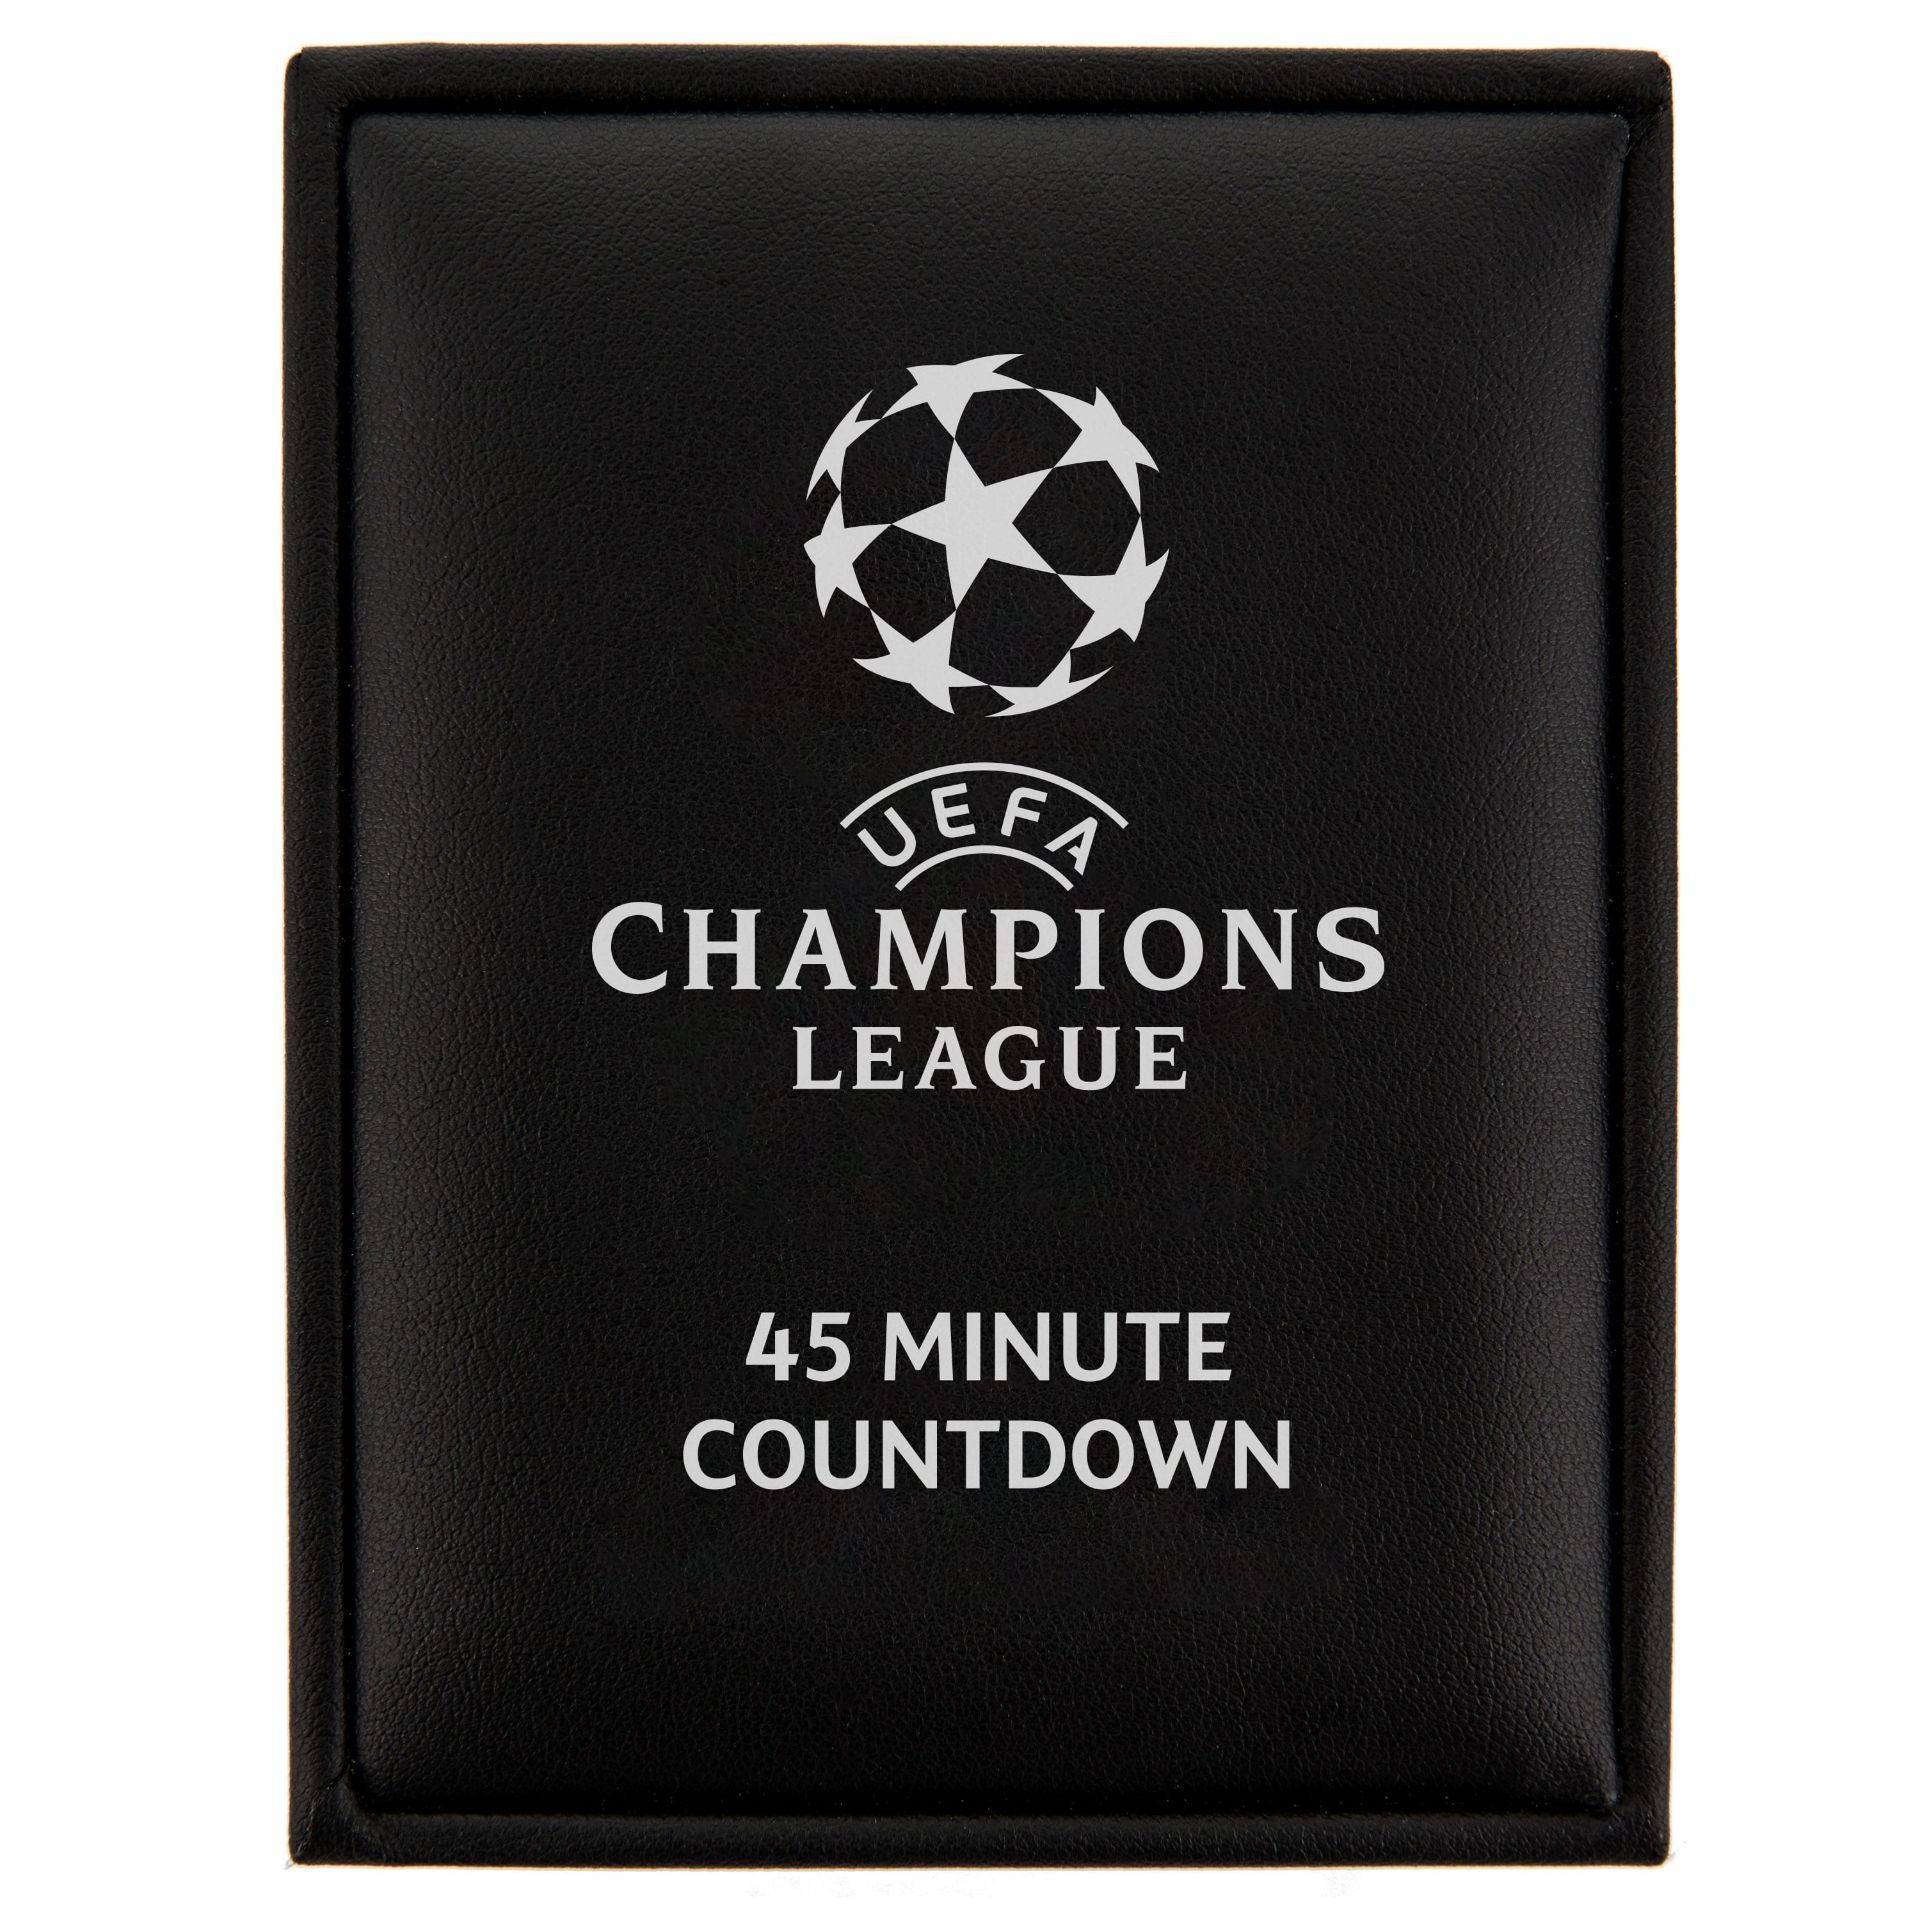 BRAND NEW OFFICIAL UEFA CHAMPIONS LEAGUE 45 MINUTE COUNTDOWN WATCH CL45-GLDW-BLWHP, RRP £225 - Image 5 of 5